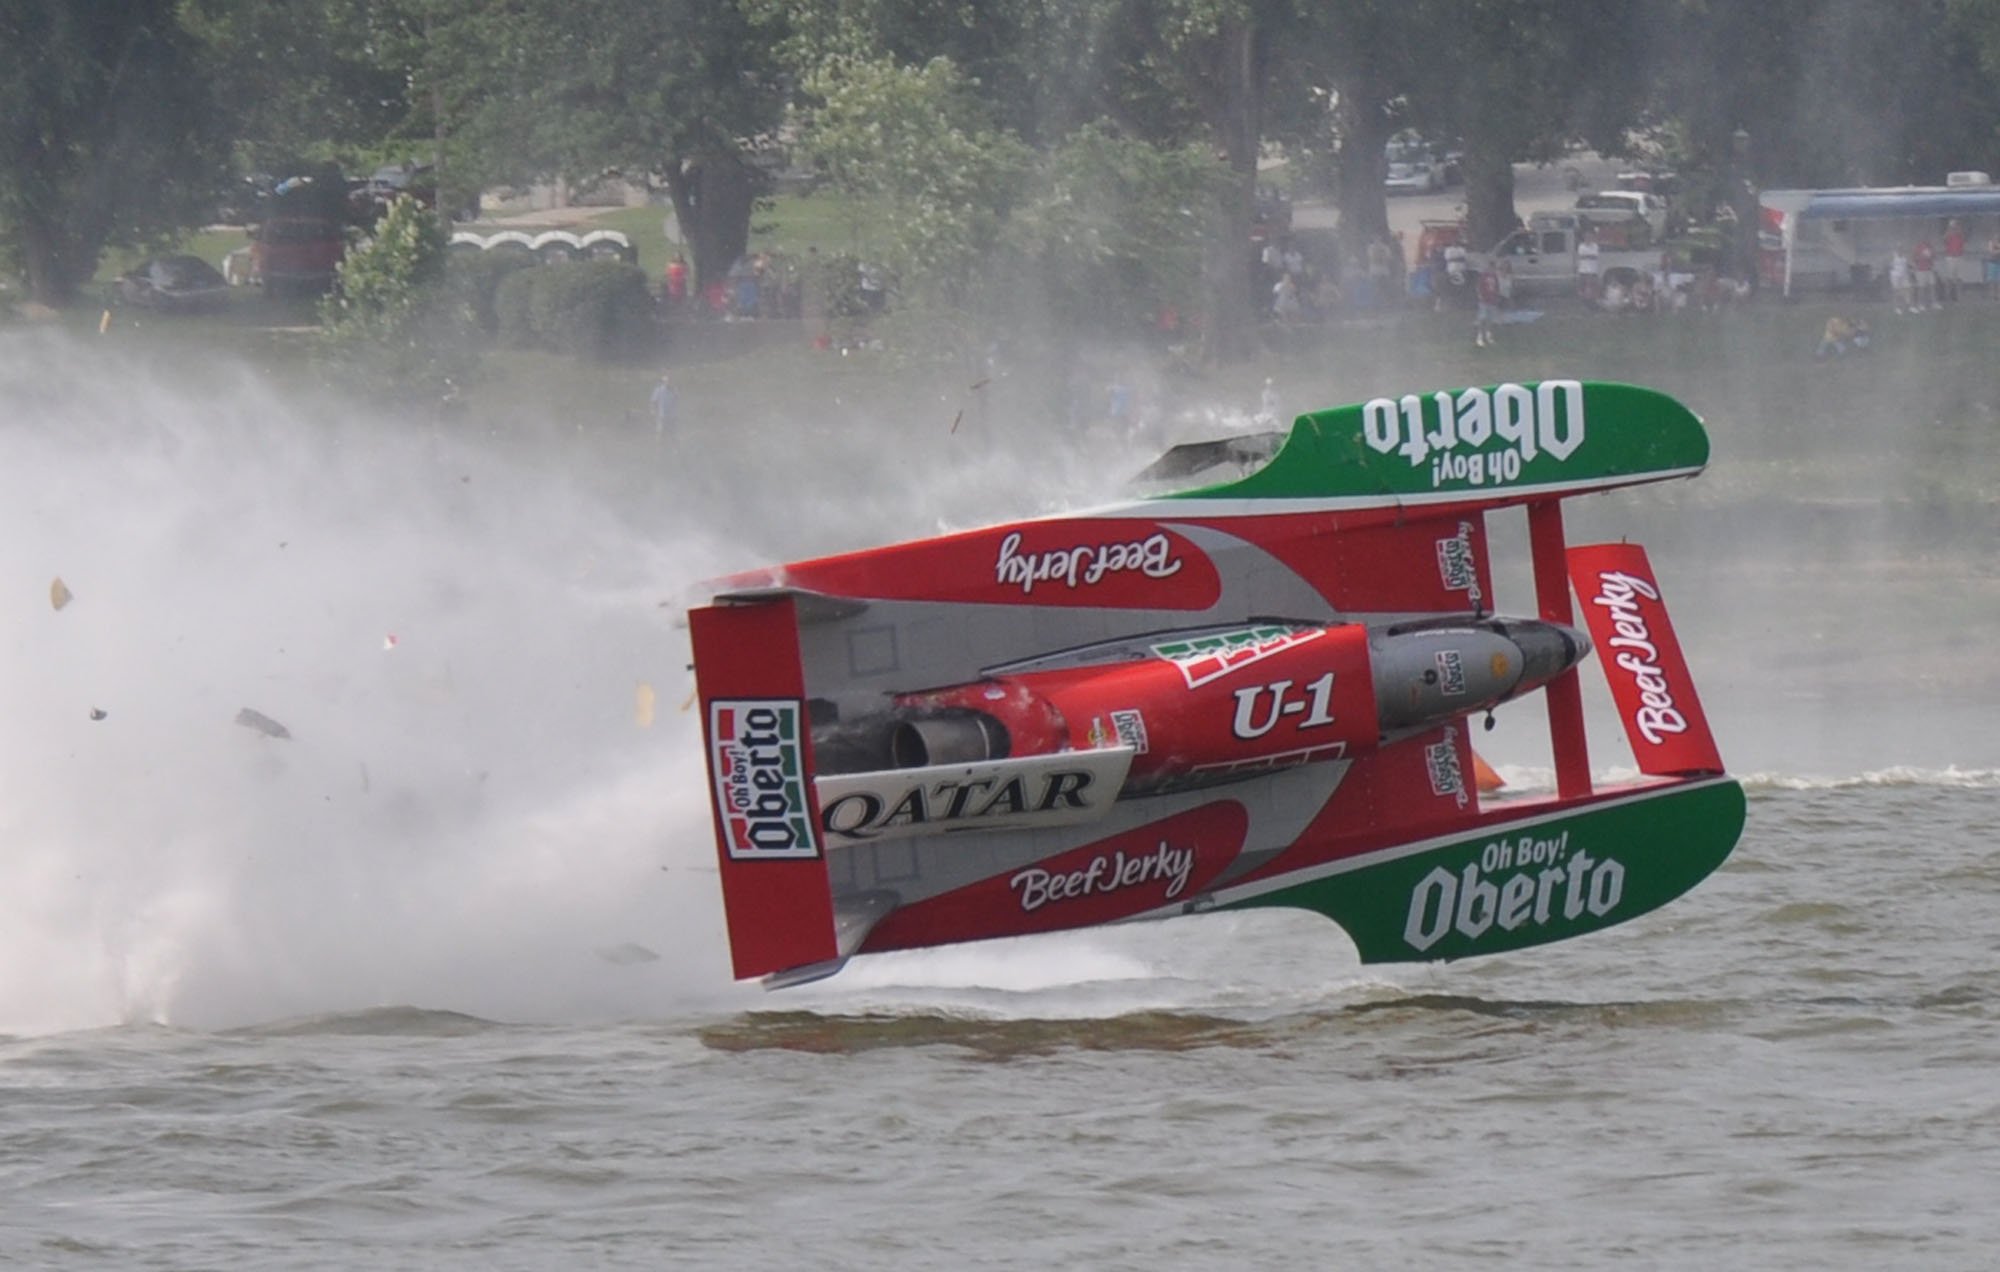 Unlimited Hydroplane race in Madison July 3rd Lake St. Clair Fishing